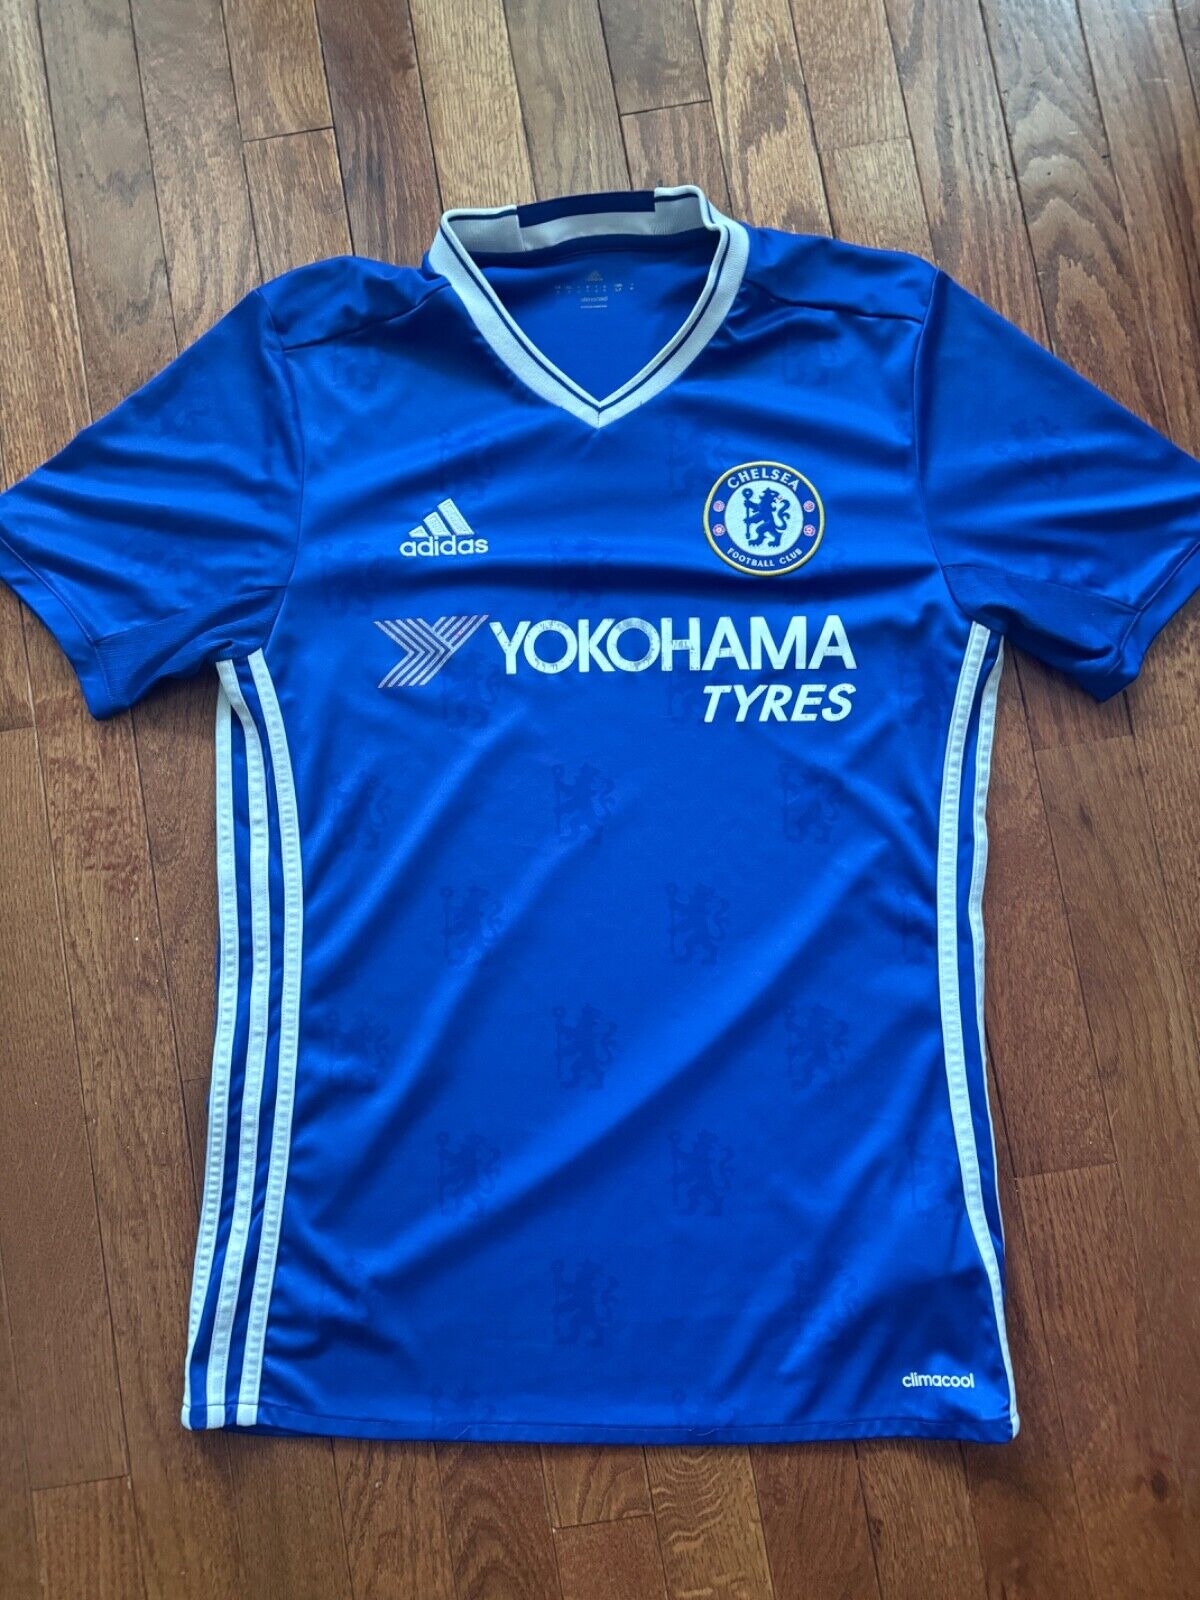 ADIDAS CHELSEA FC HOME JERSEY 2016/17 SIZE SMALL, BLUE ADN WHITE, BLANK JERSEY 